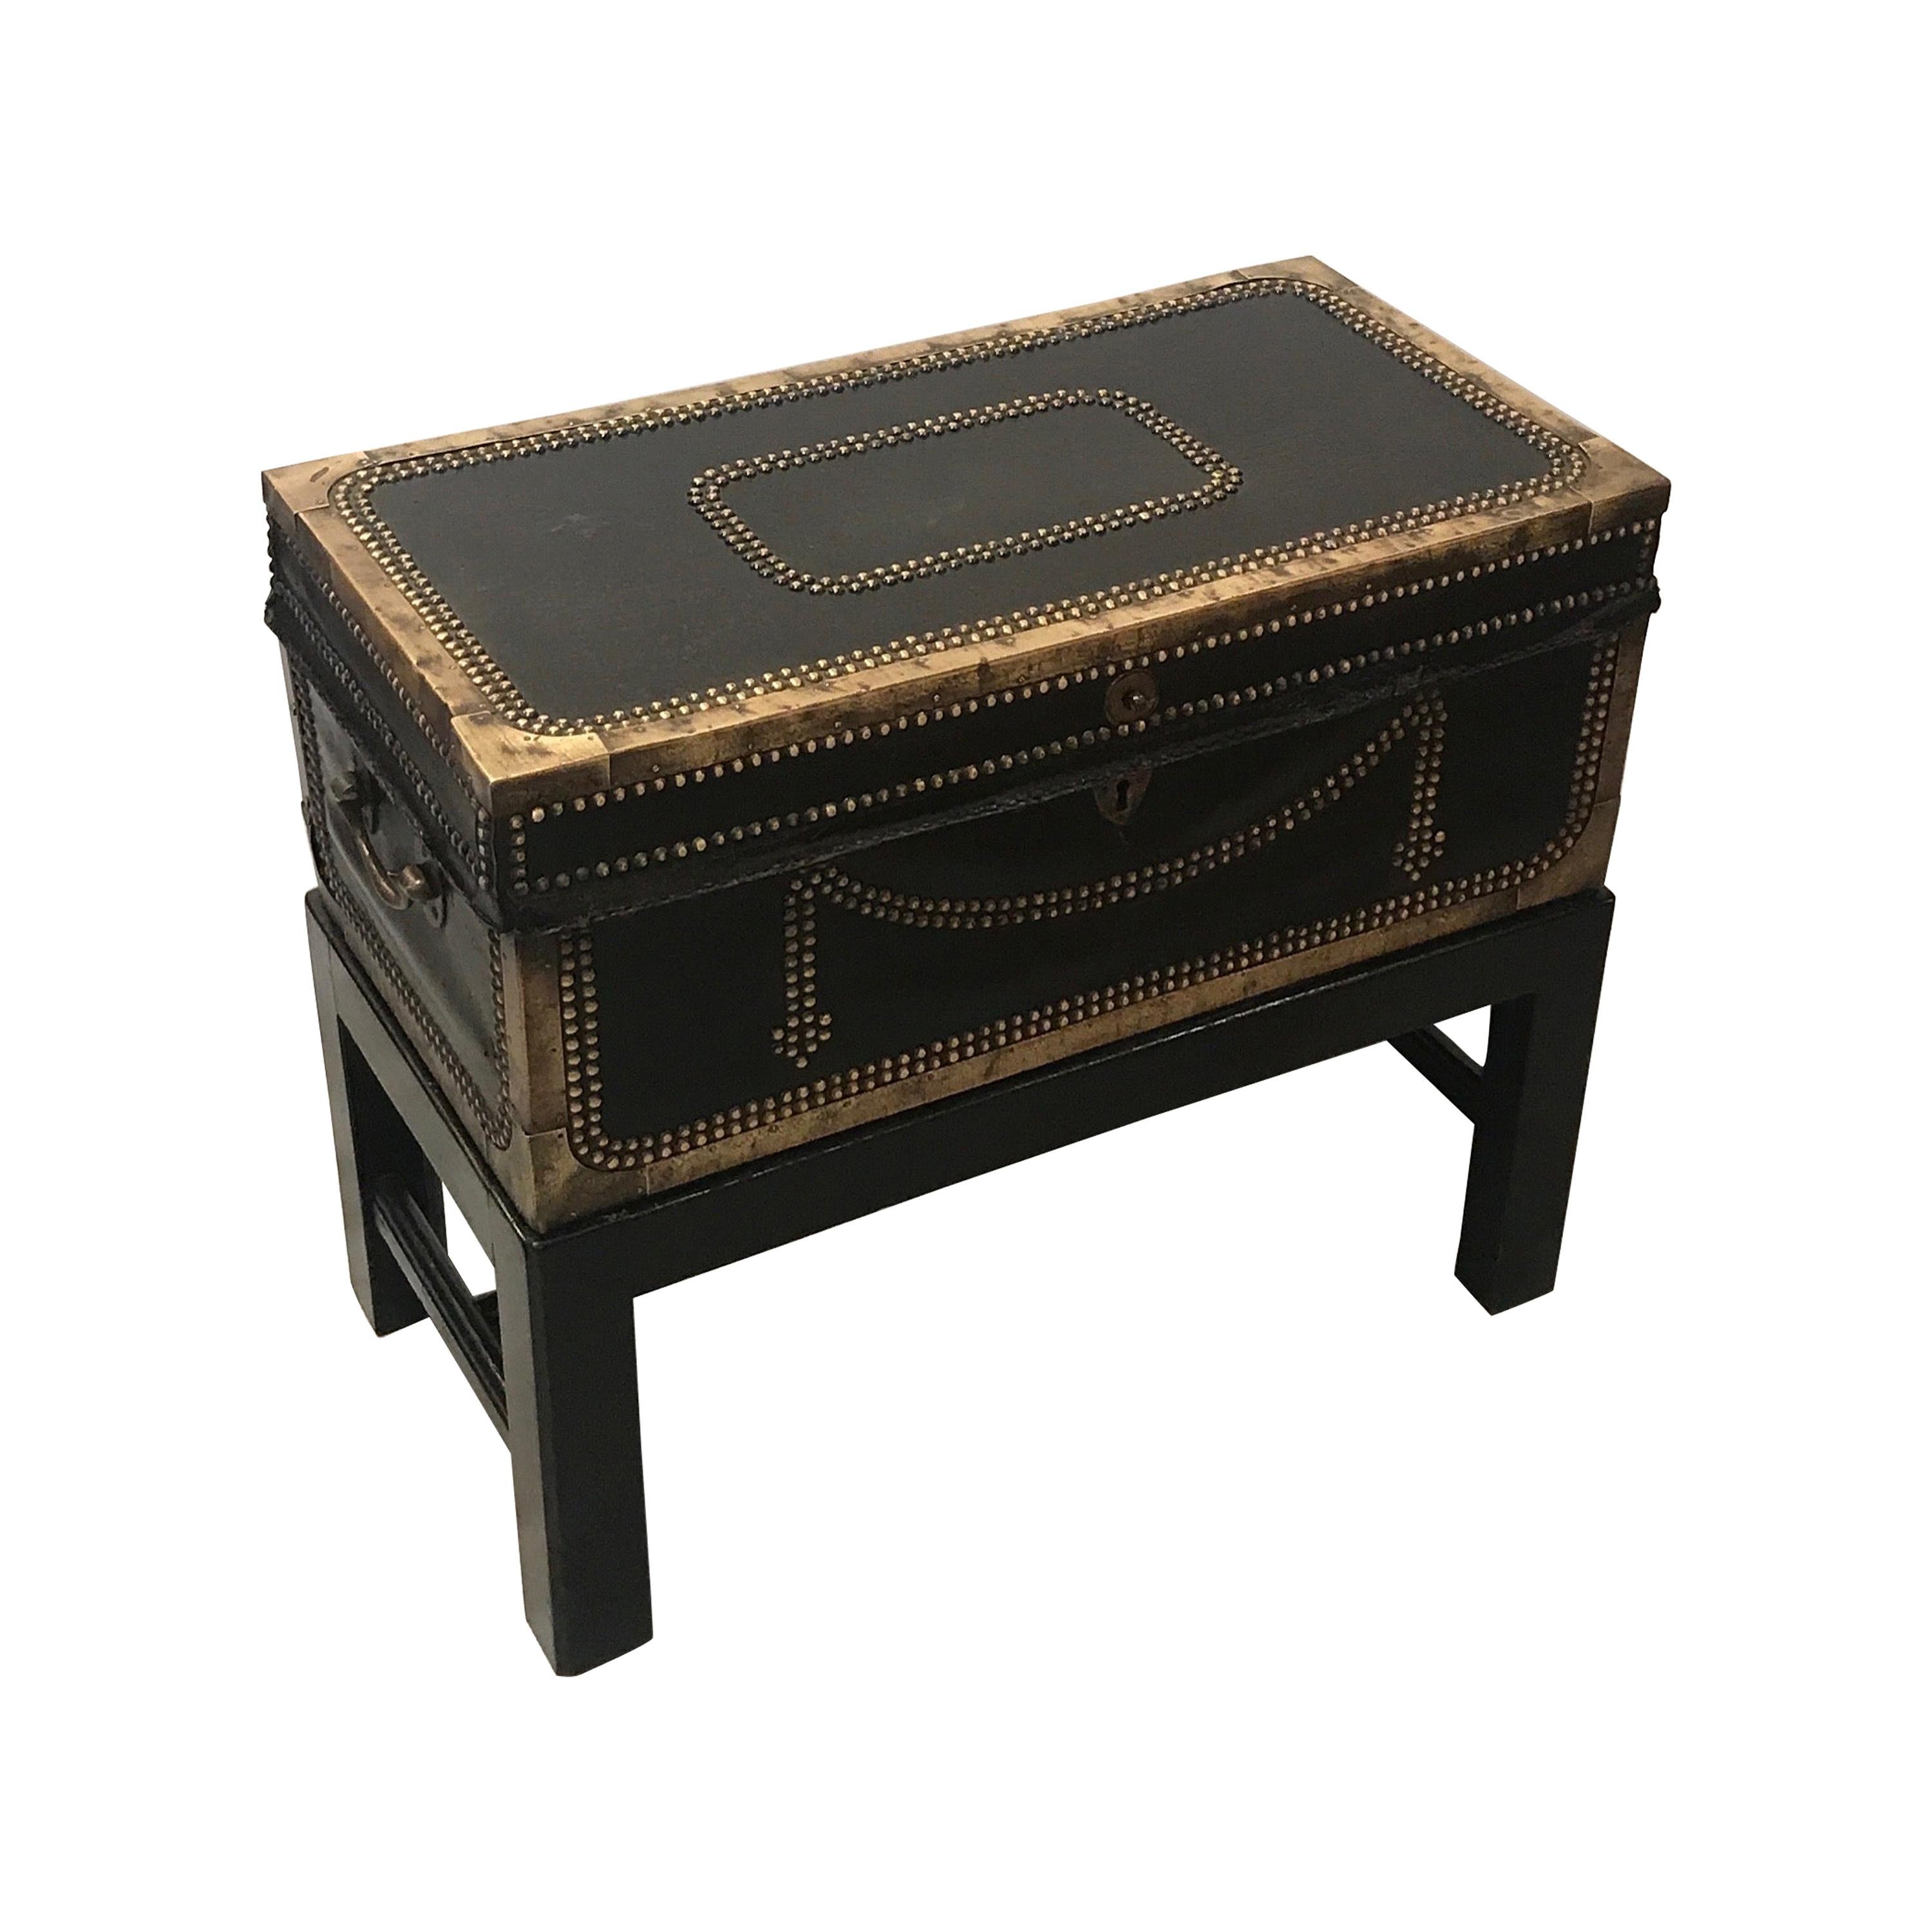 Mid-19th Century Leather and Brass Mounted Box on Stand